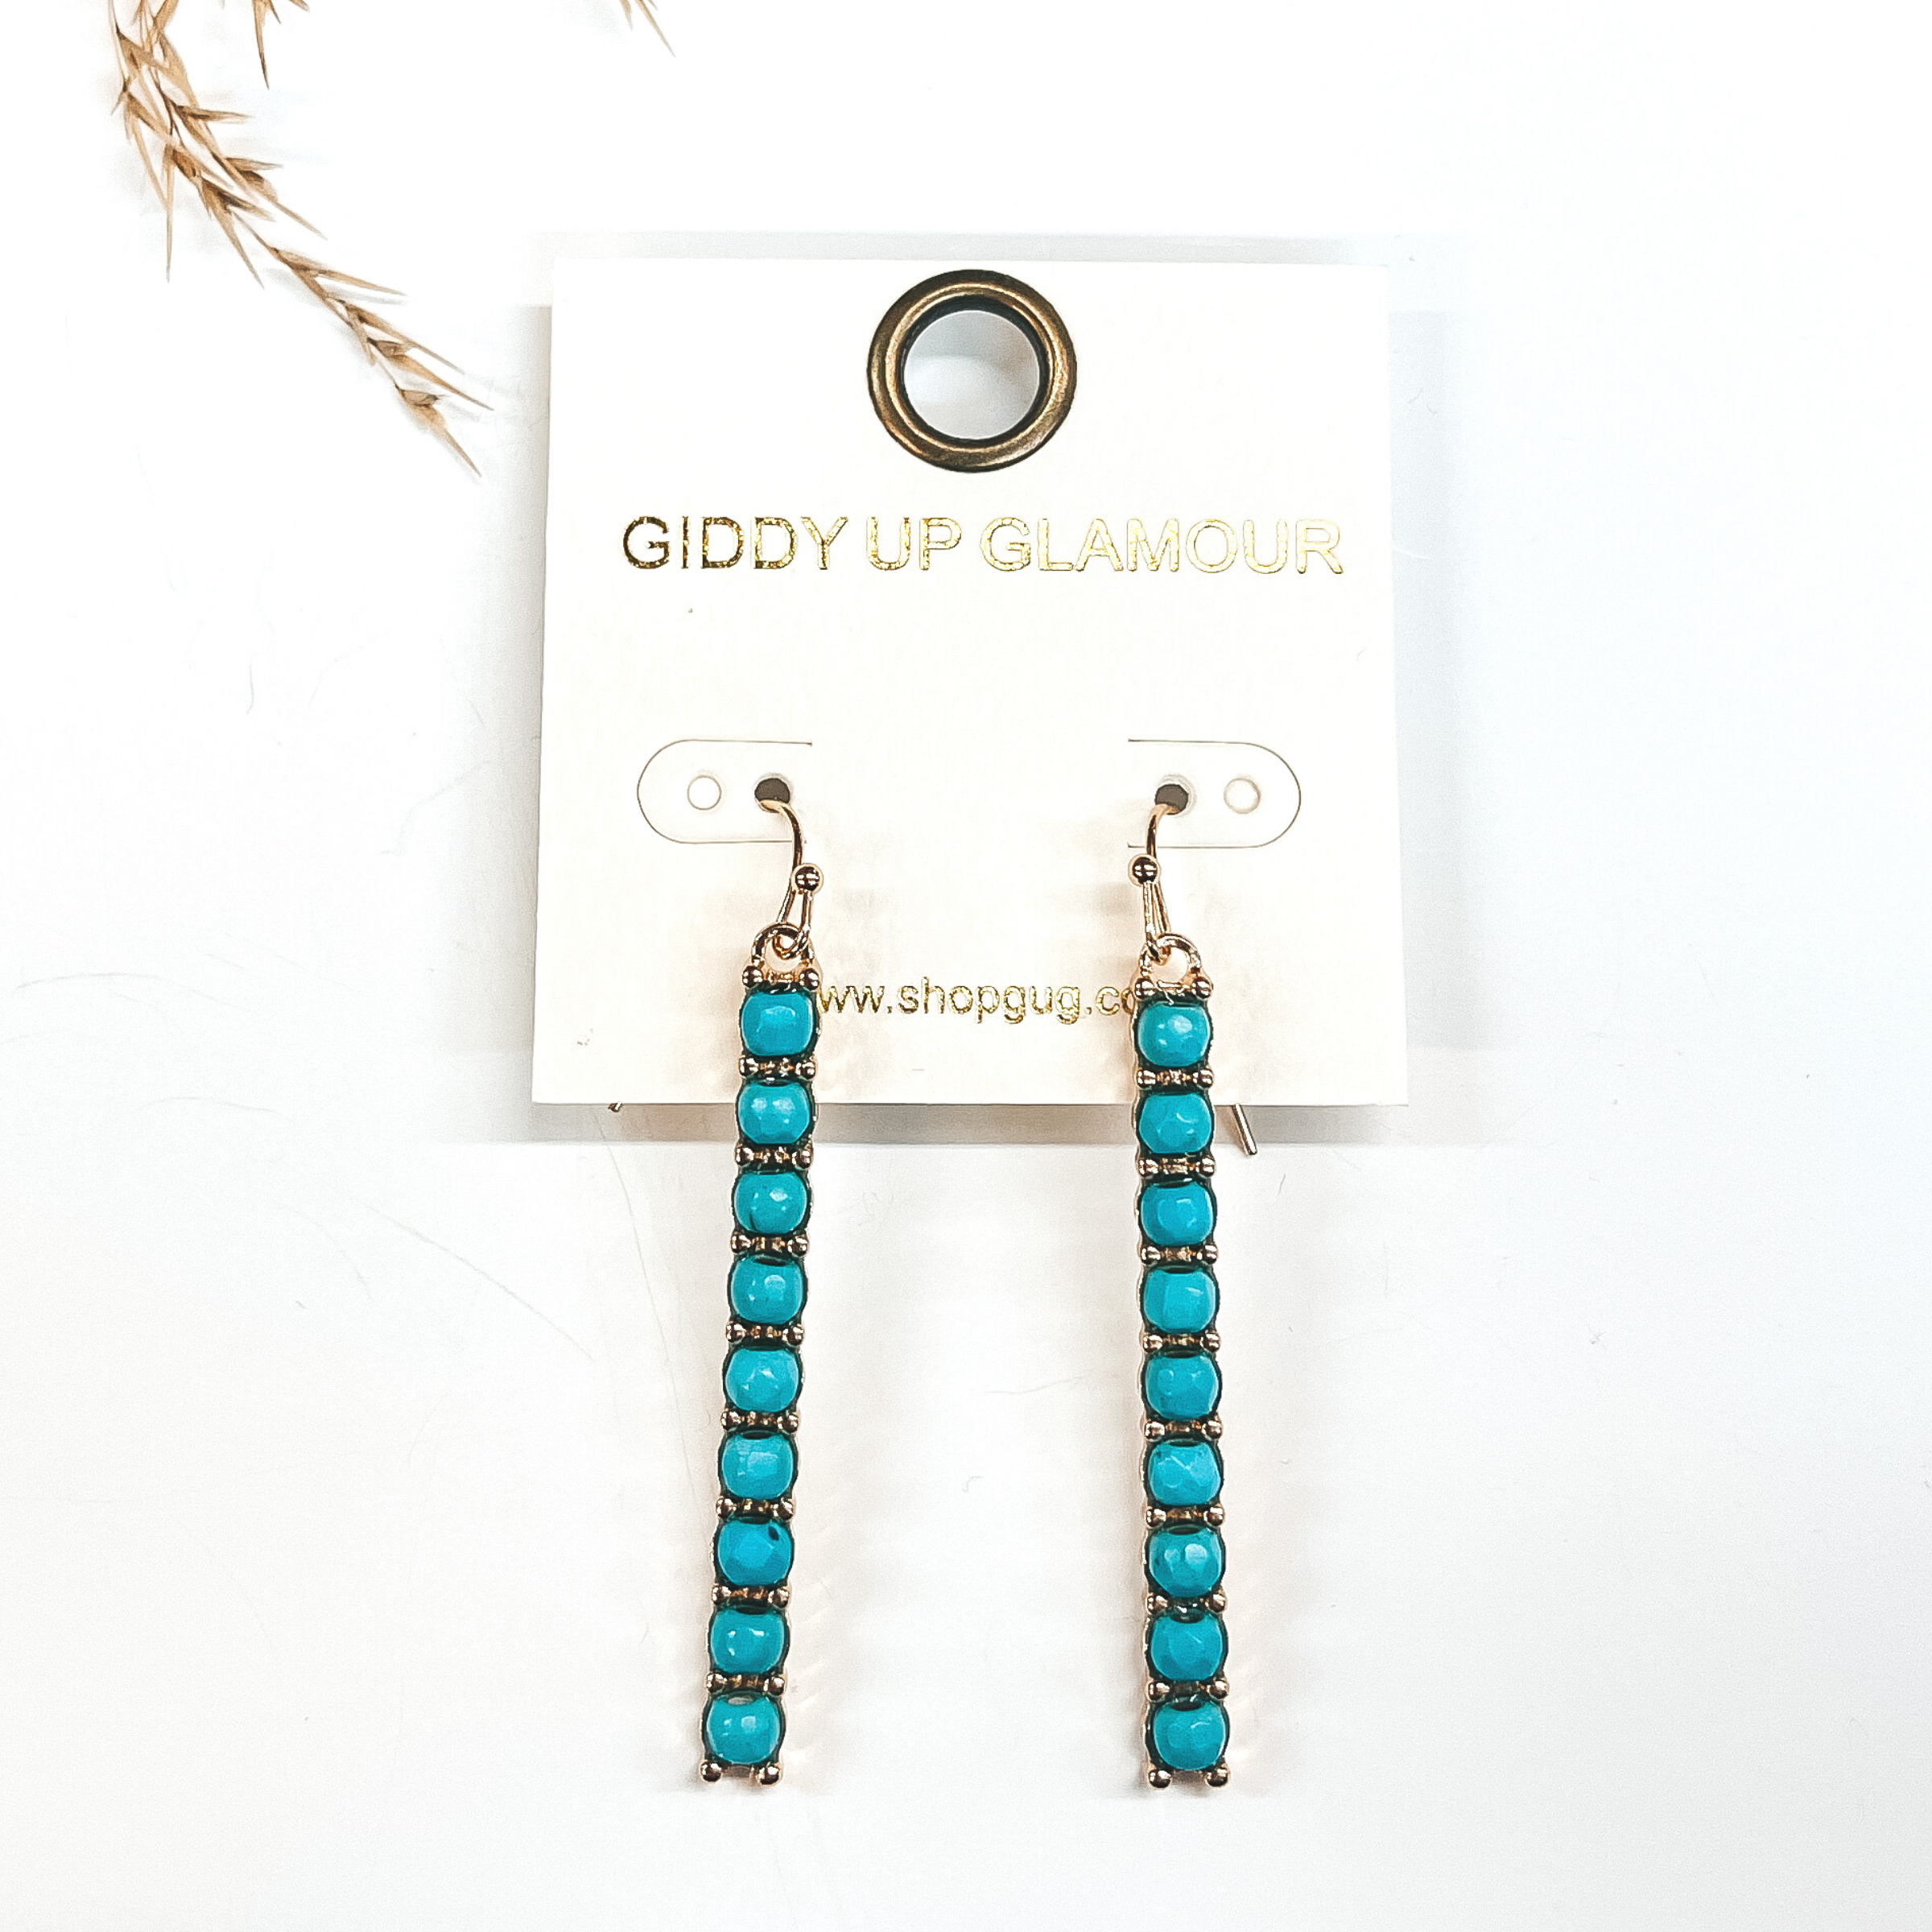 Gold rectangle drop earrings with turquoise colored beads all the way down.  Taken on a white background with a brown plant in  the back as decor.